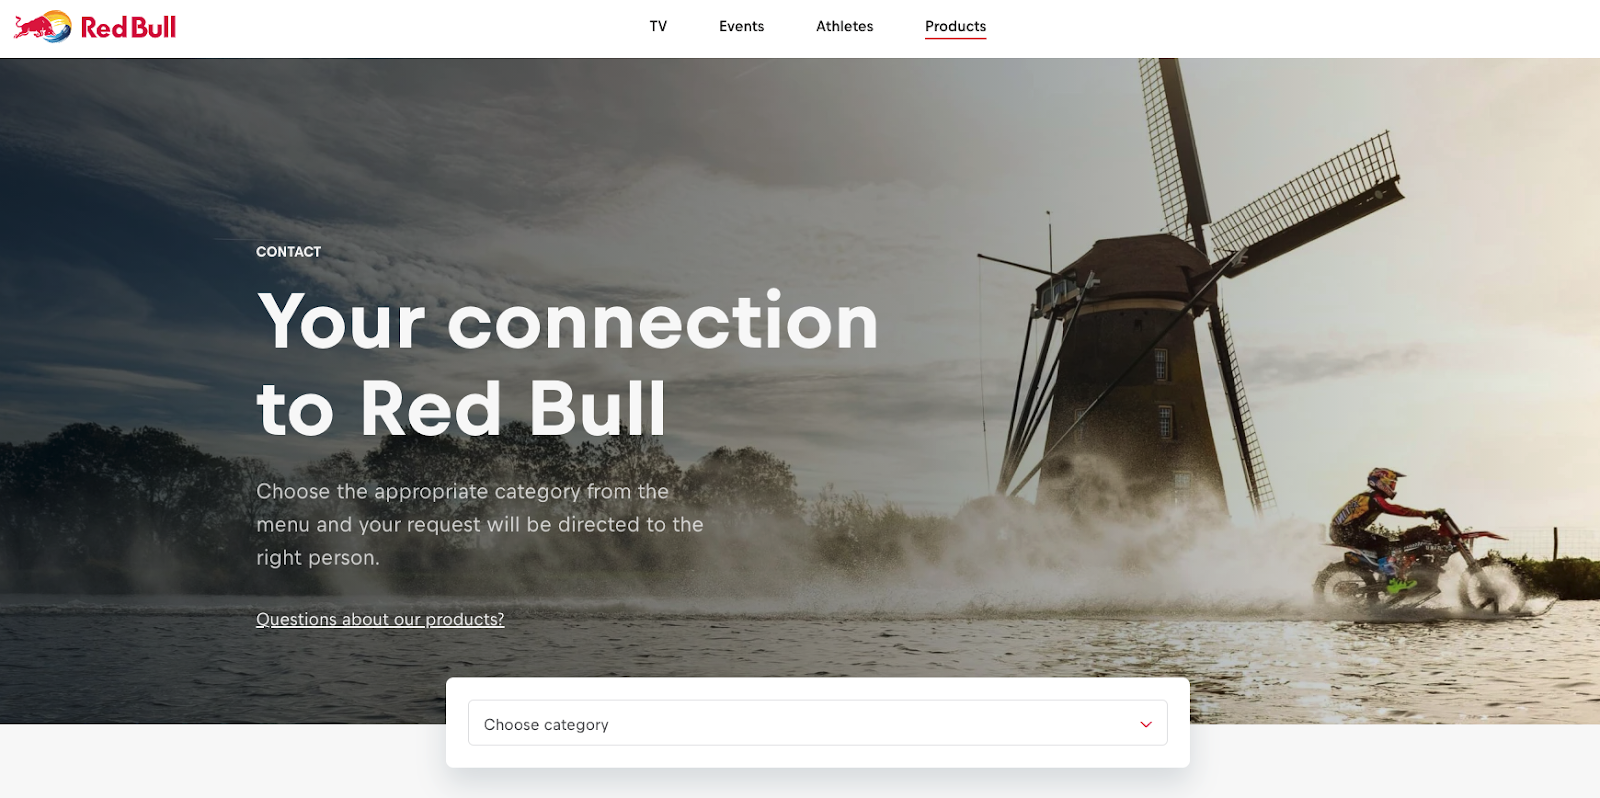 Red Bull Contact Page